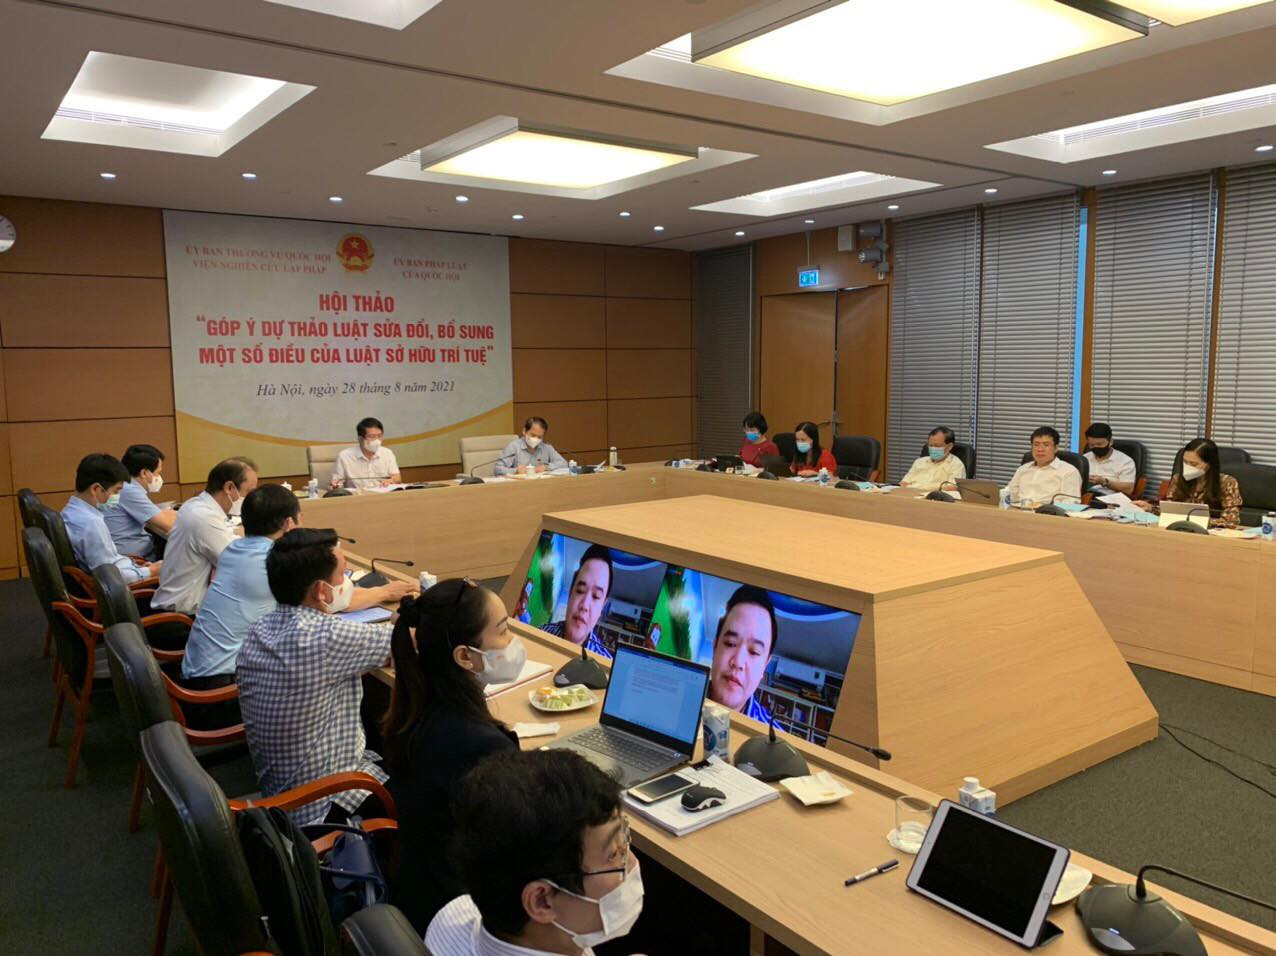 Lawyer Pham Duy Khuong presented at the workshop to comment on the draft amendment and supplement to the Vietnam intellectual property law at the invitation of the Vietnamese National Assembly's Law Committee.